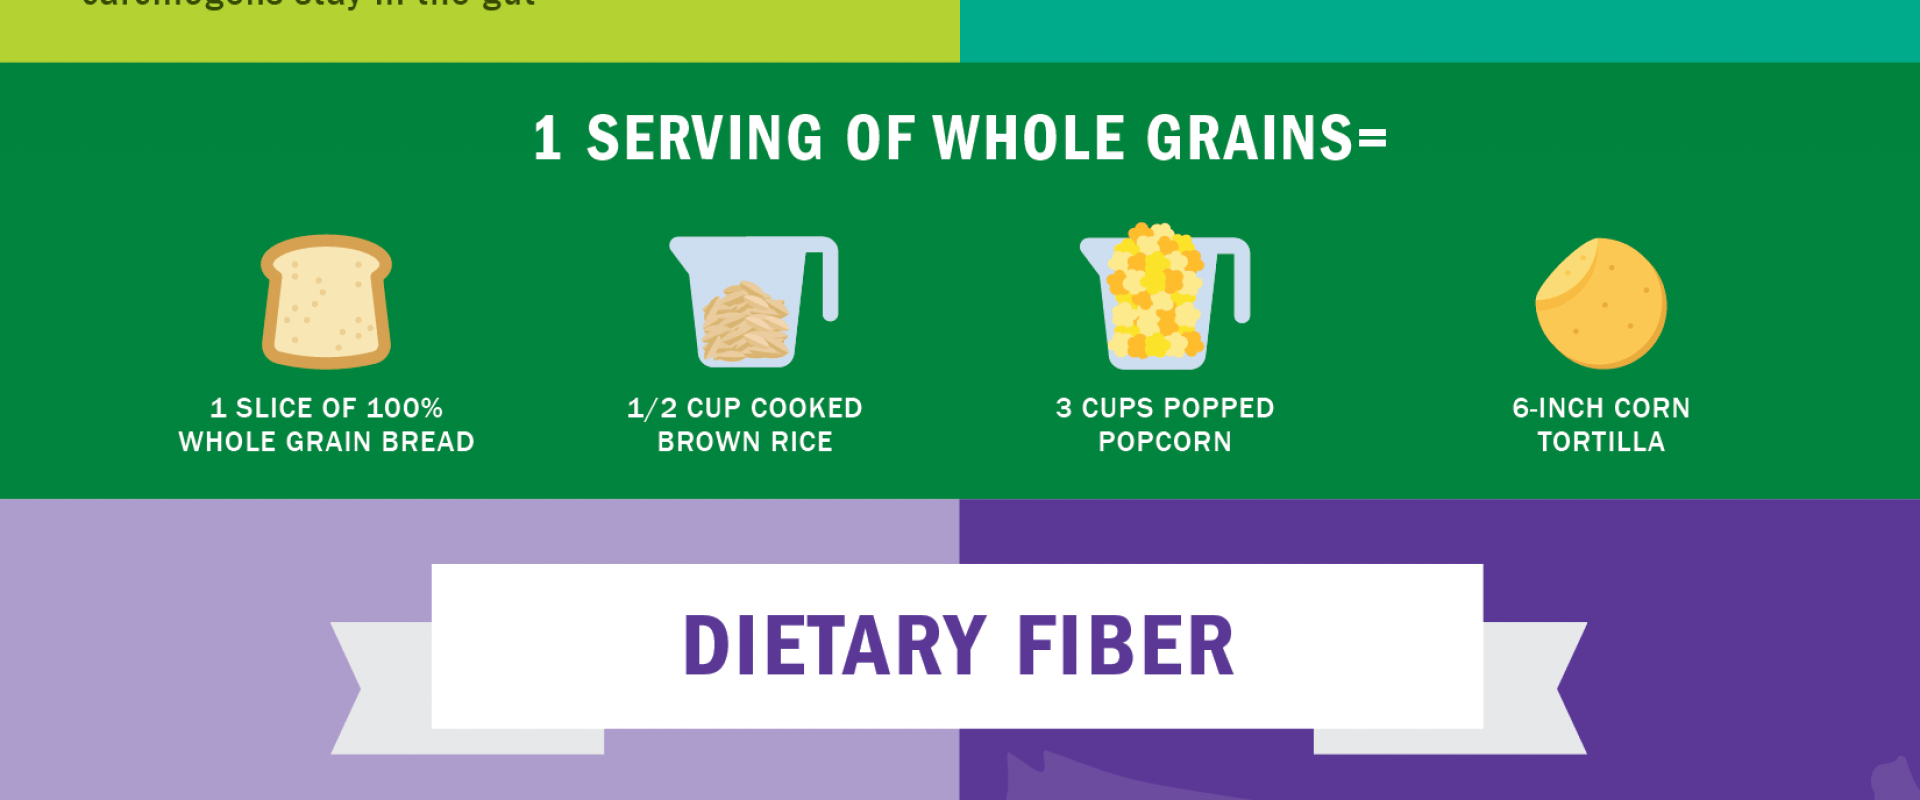 whole grains and dietary fiber